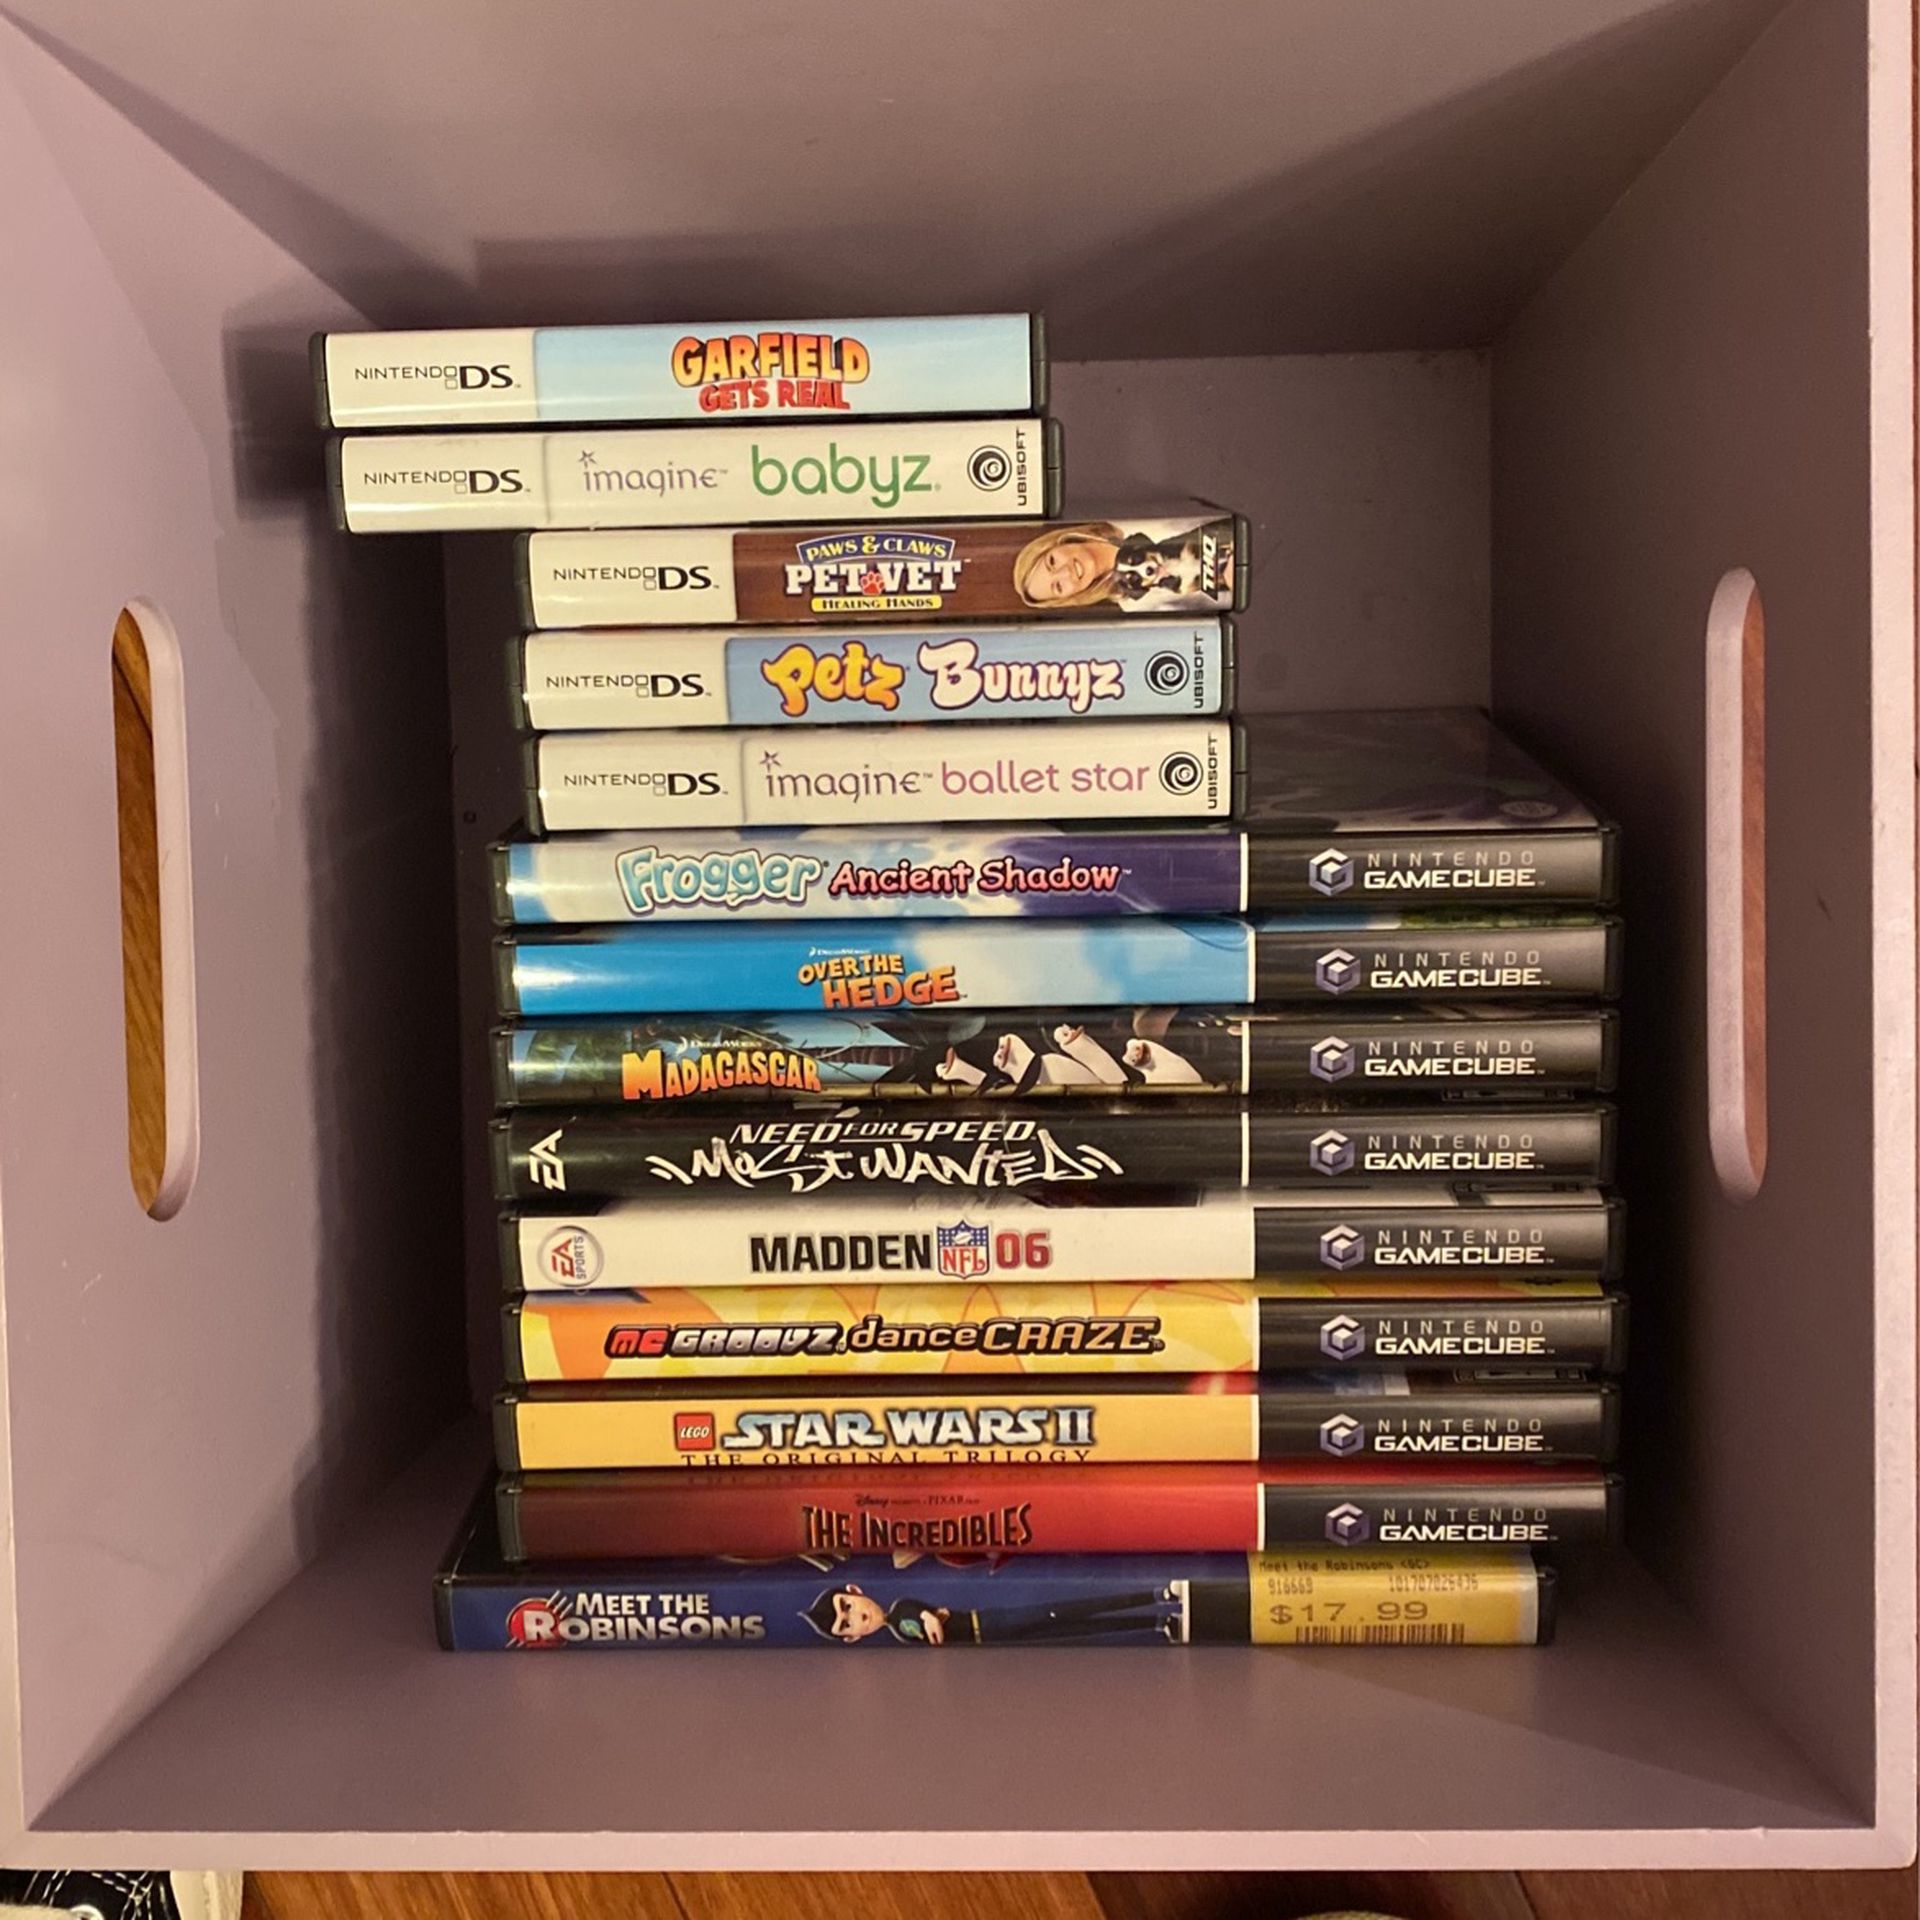 GameCube And DS games